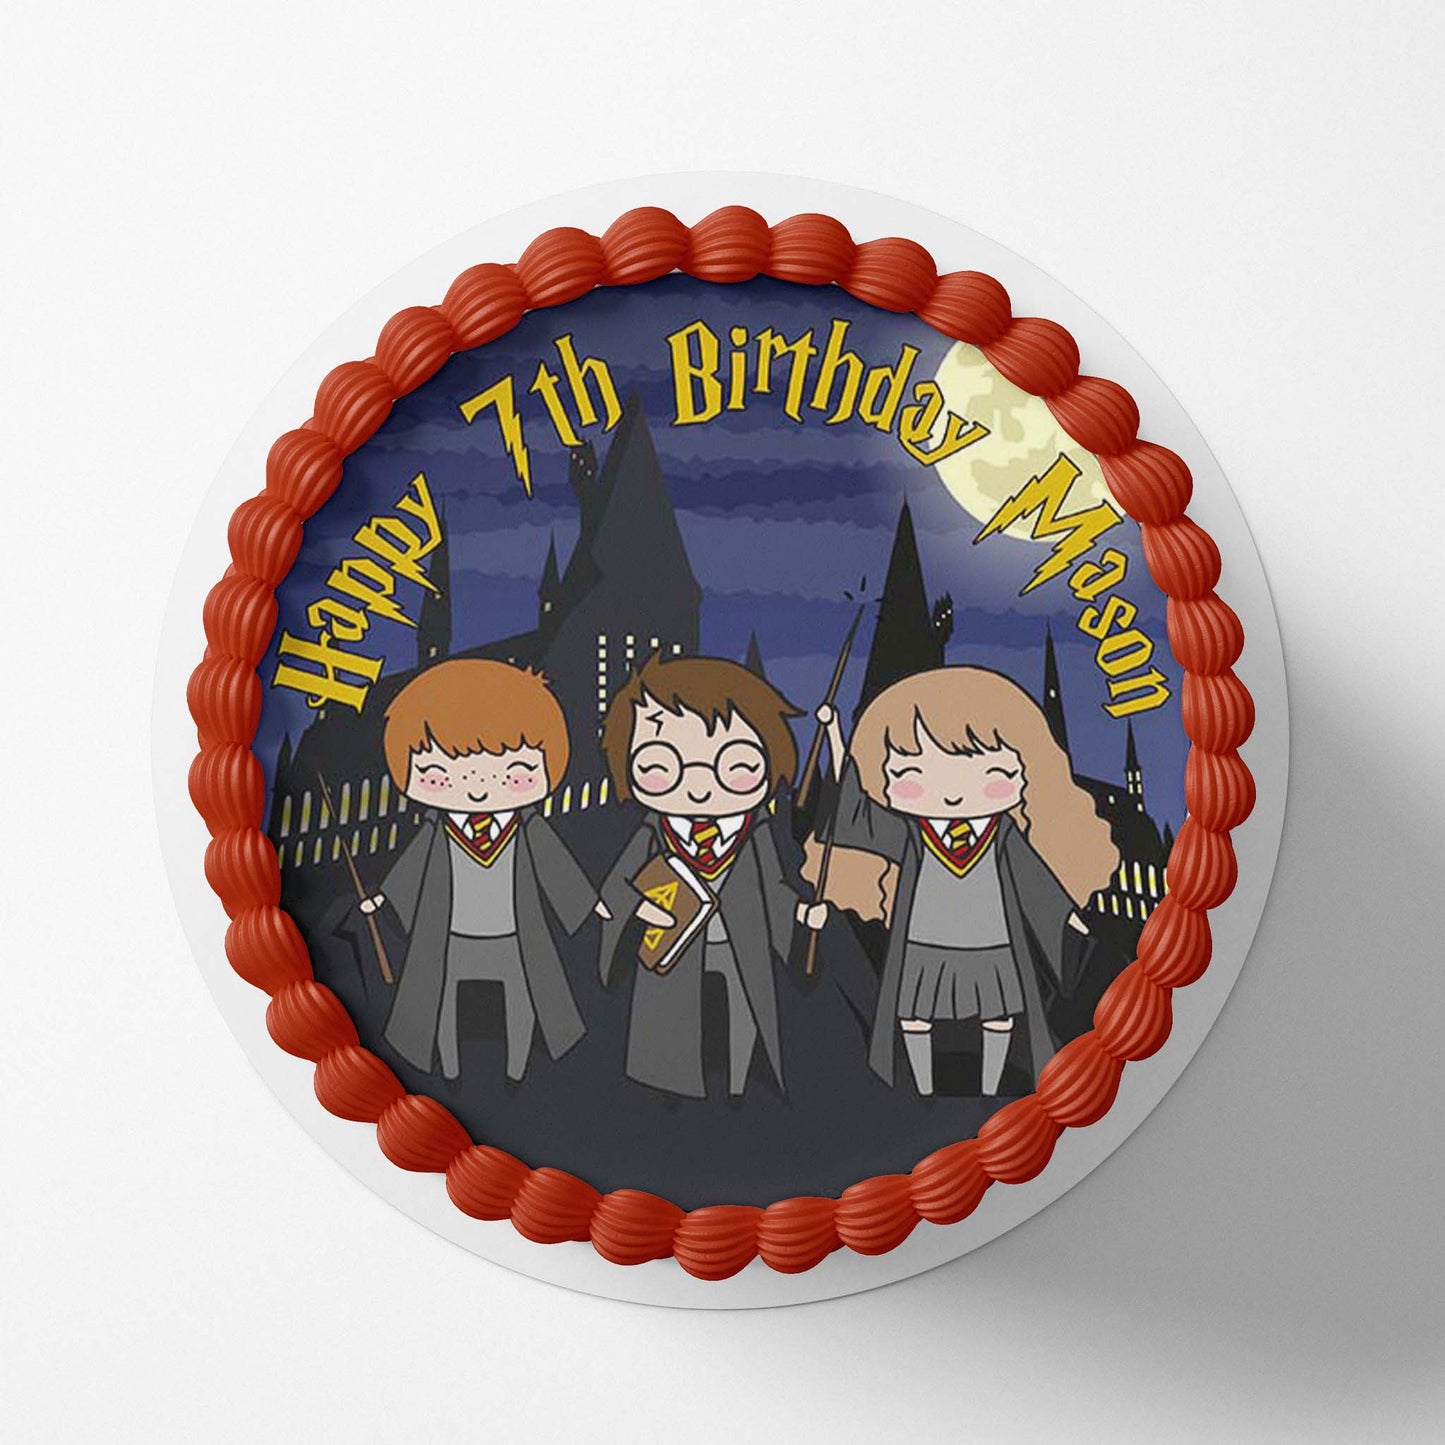 Harry Potter themed cake edible image prints on cakes